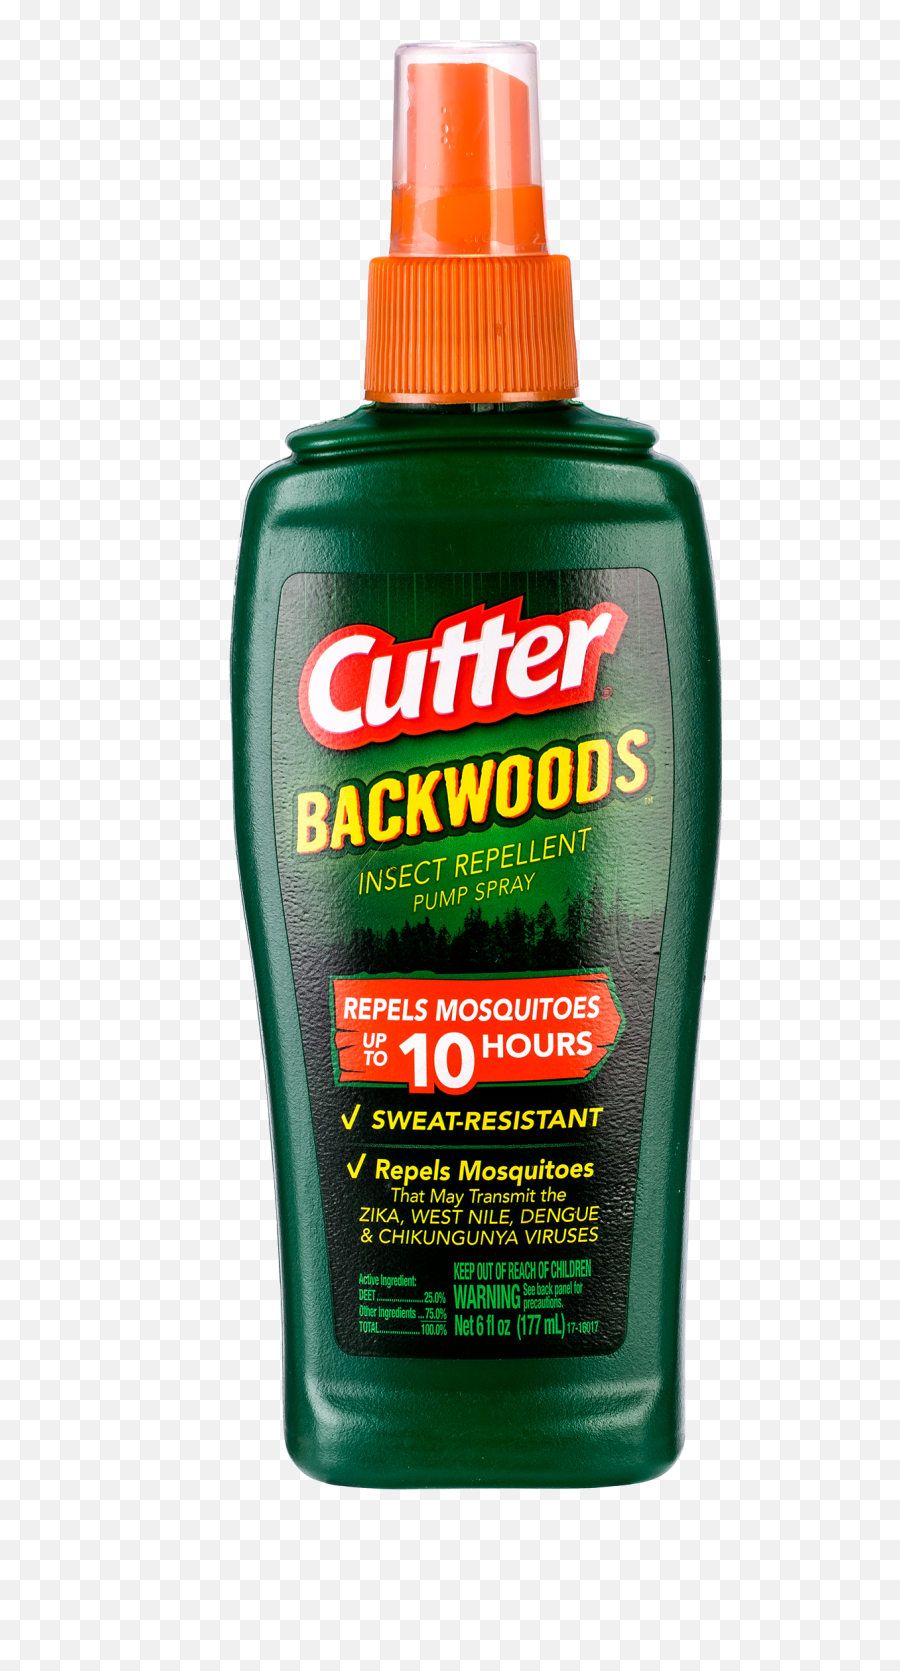 Cutter Backwoods Insect Repellent Insect Repellent Emoji,Backwood Png